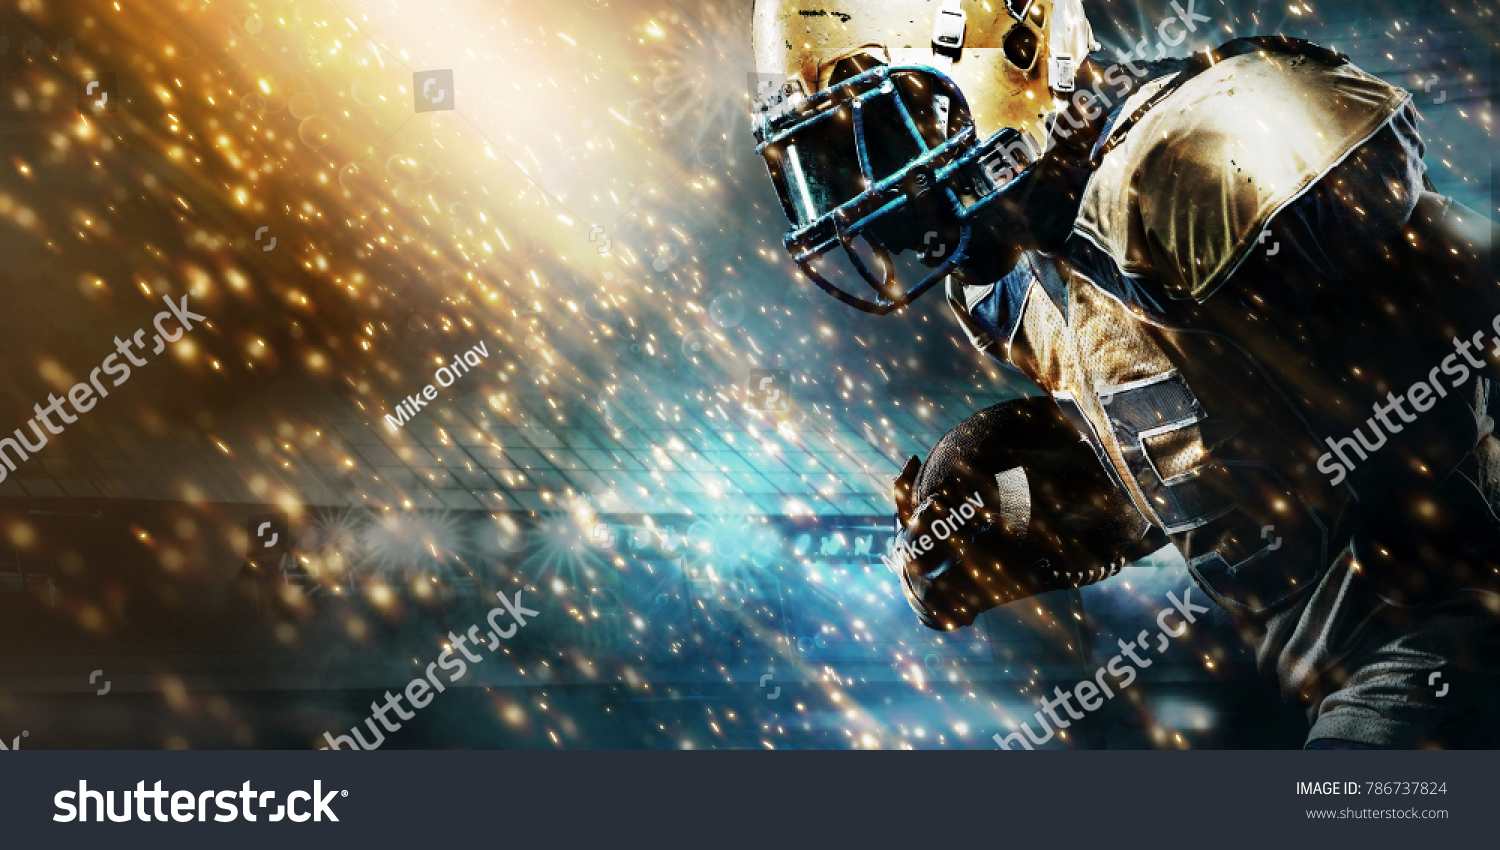 American football sportsman player on stadium running in action. Sport wallpaper with copyspace. #786737824